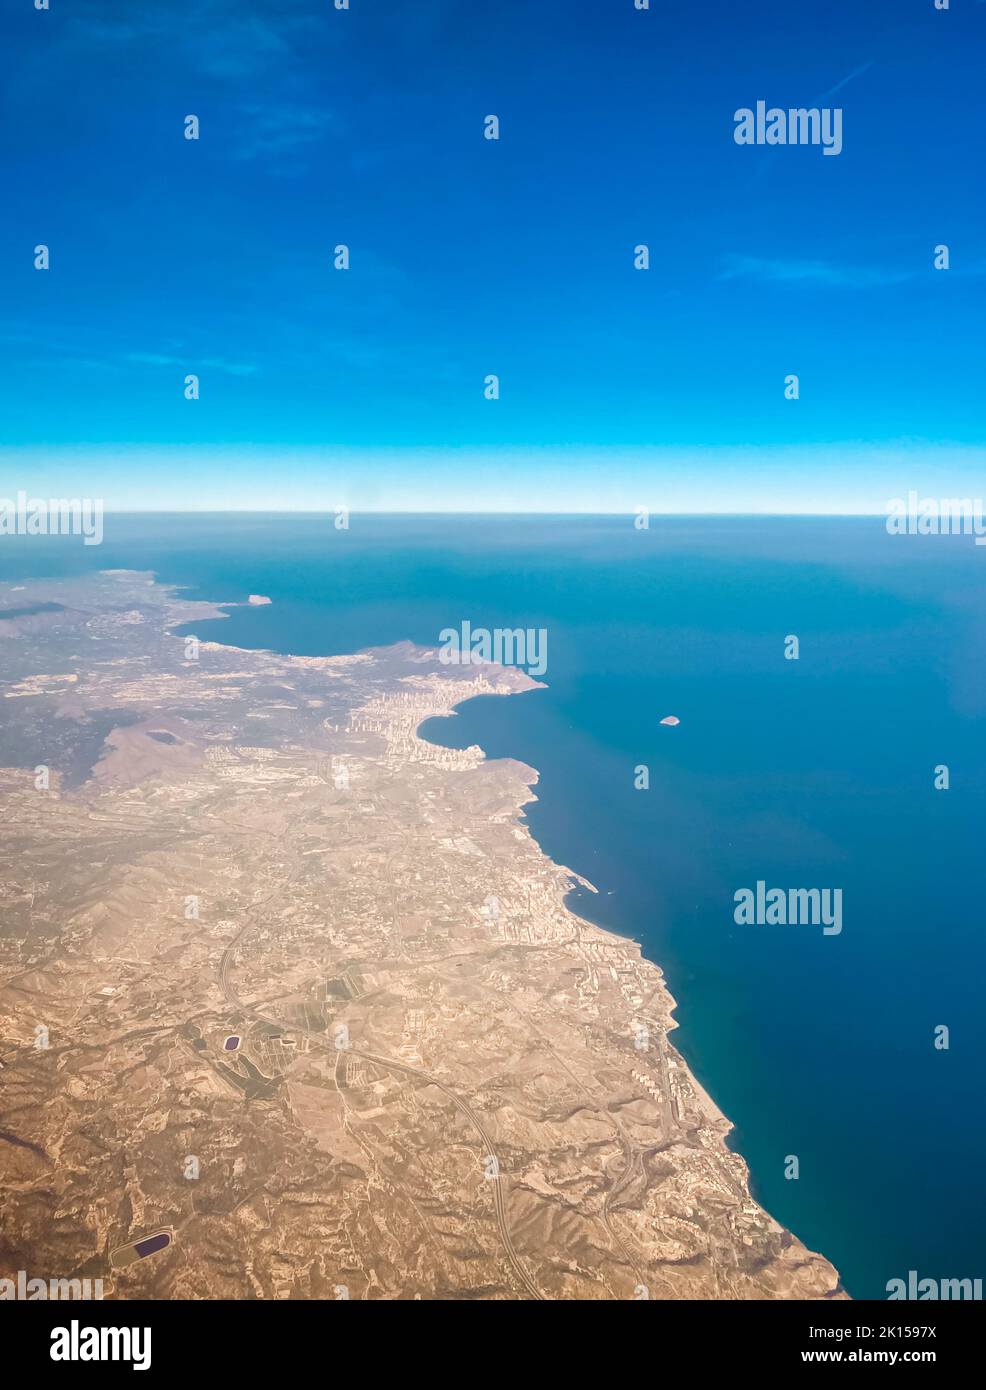 Amazing view of Spain's coast and ocean from the plane Stock Photo